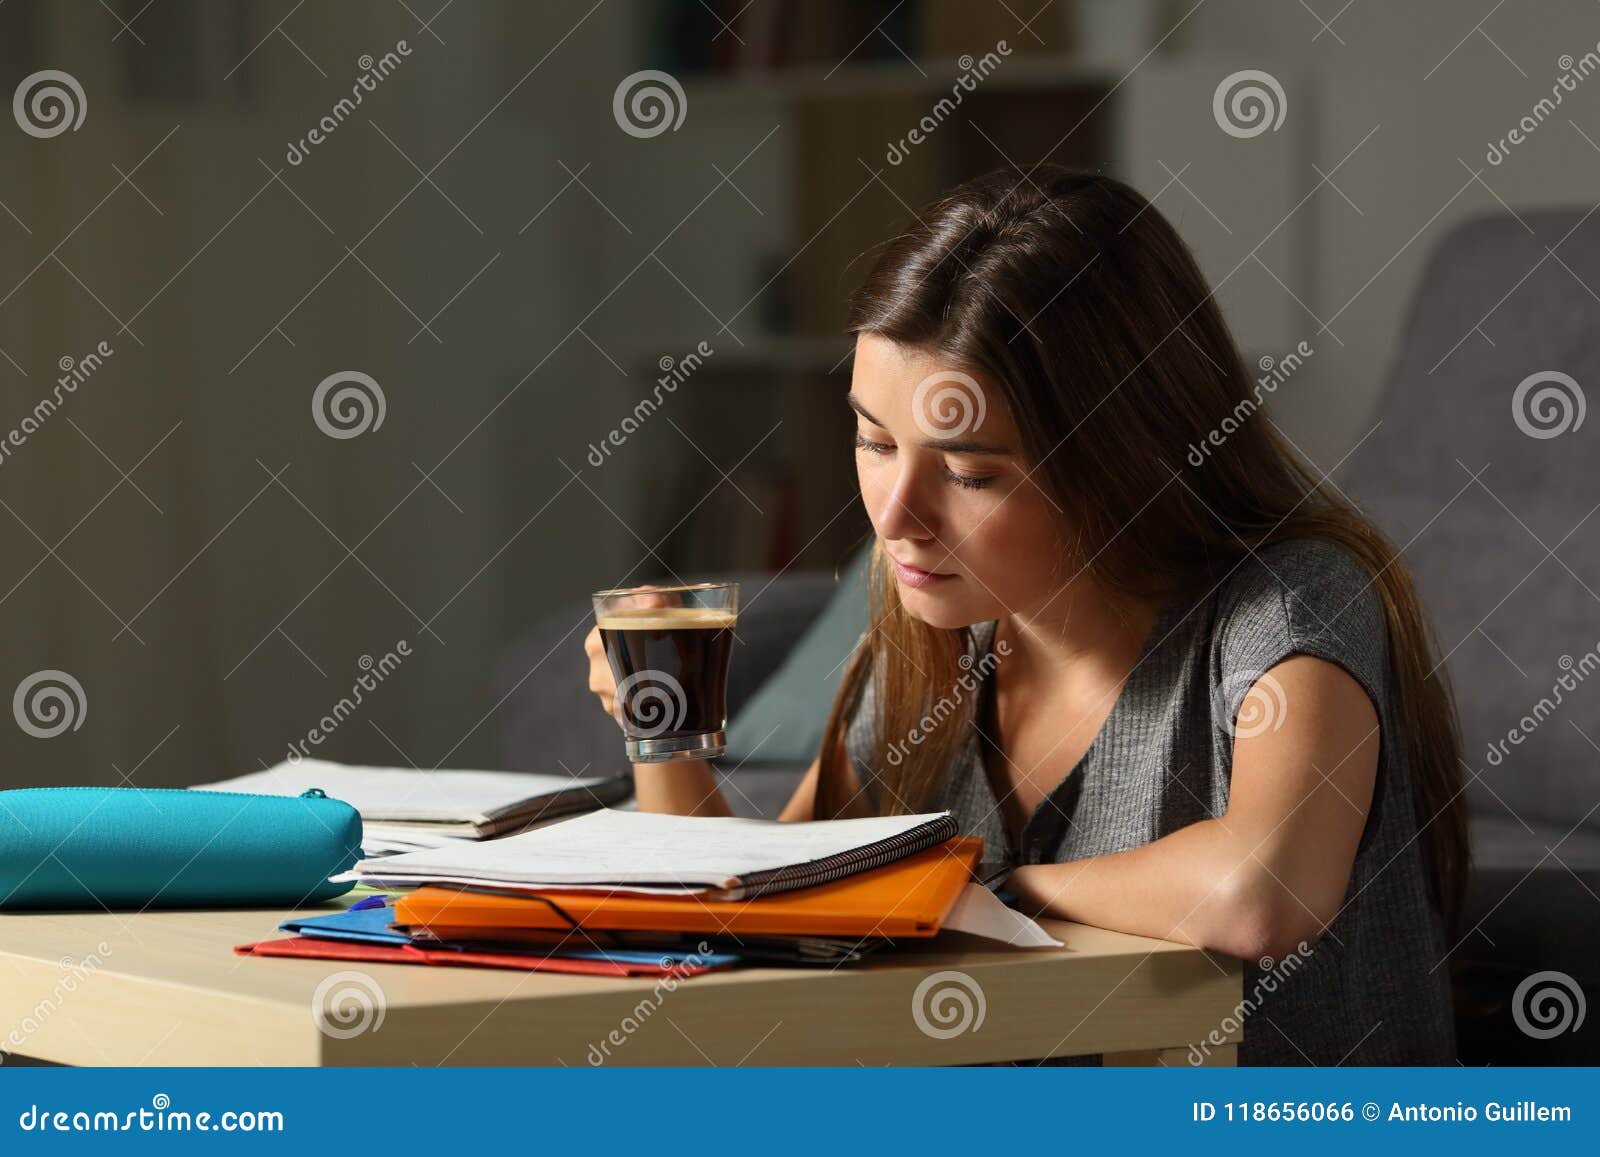 studious student studying holding a coffee cup